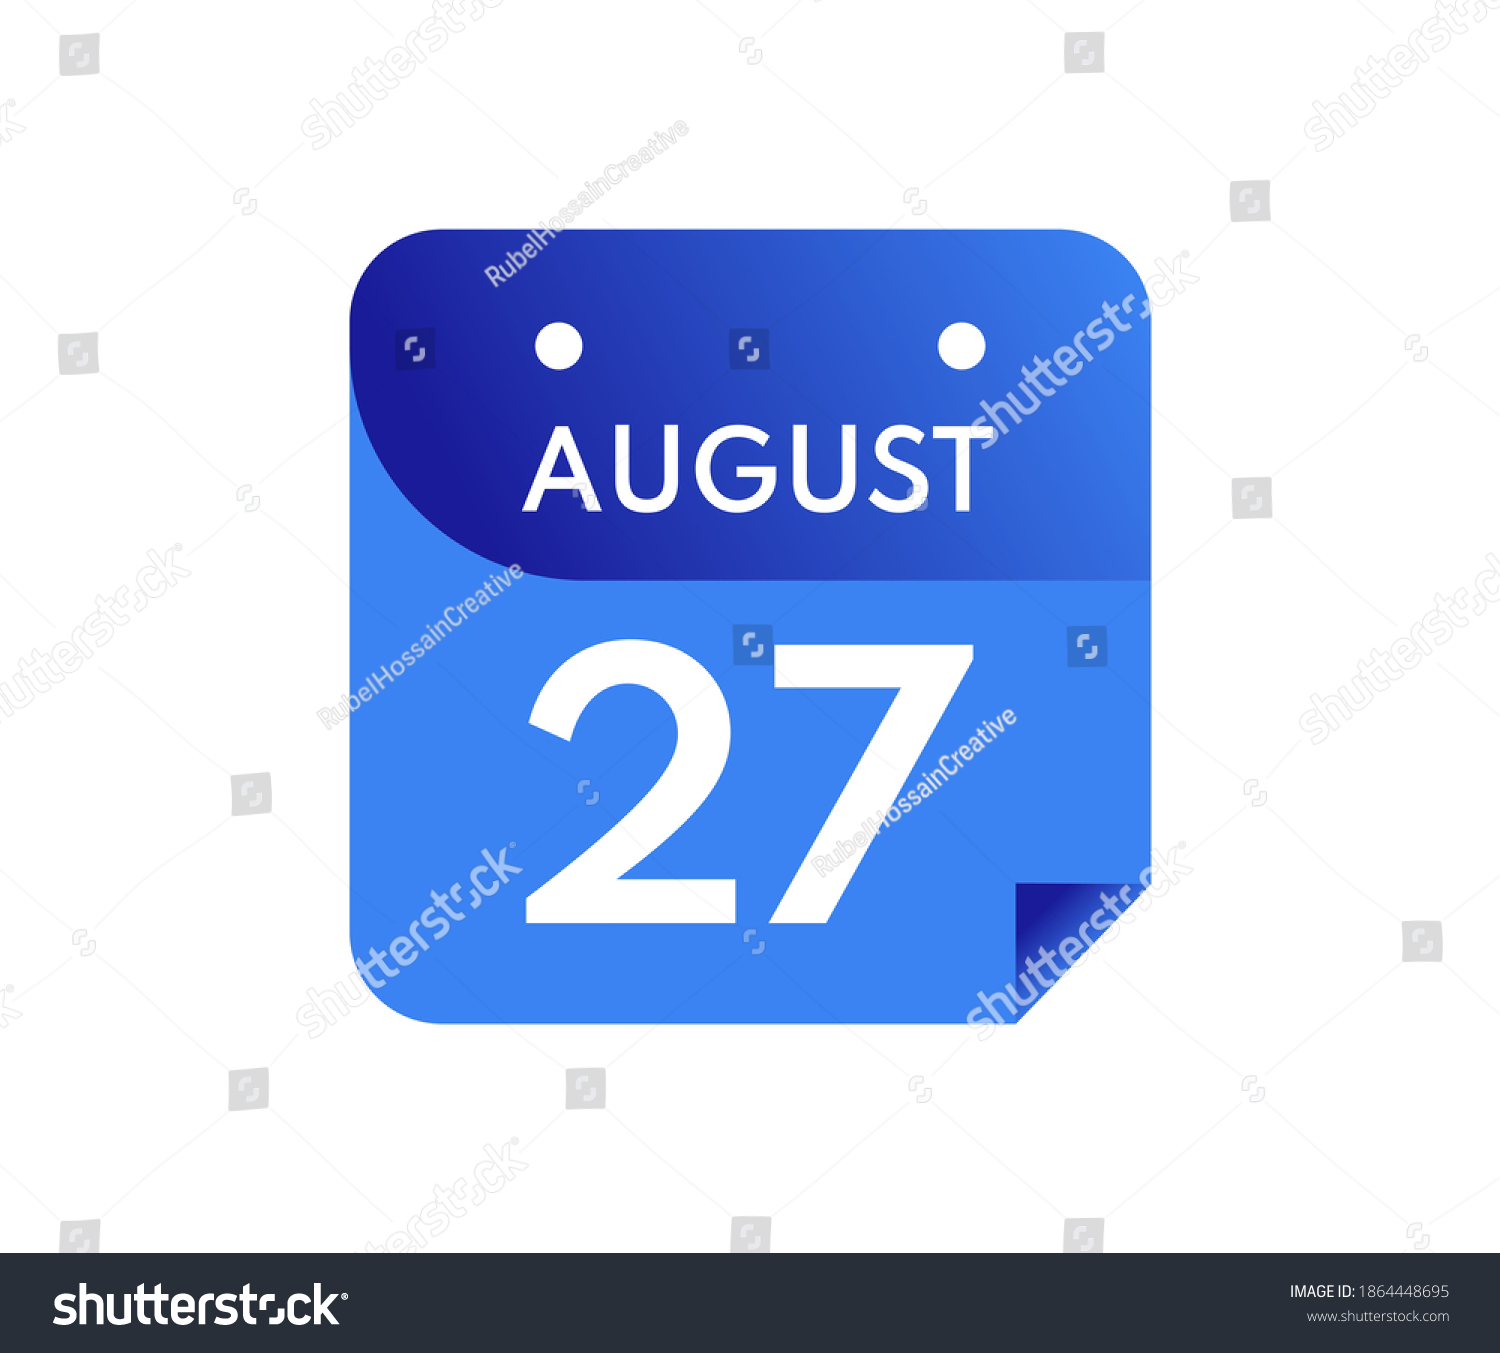 SVG of August 27 Date on a Single Day Calendar in Flat Style, 27 August calendar icon svg